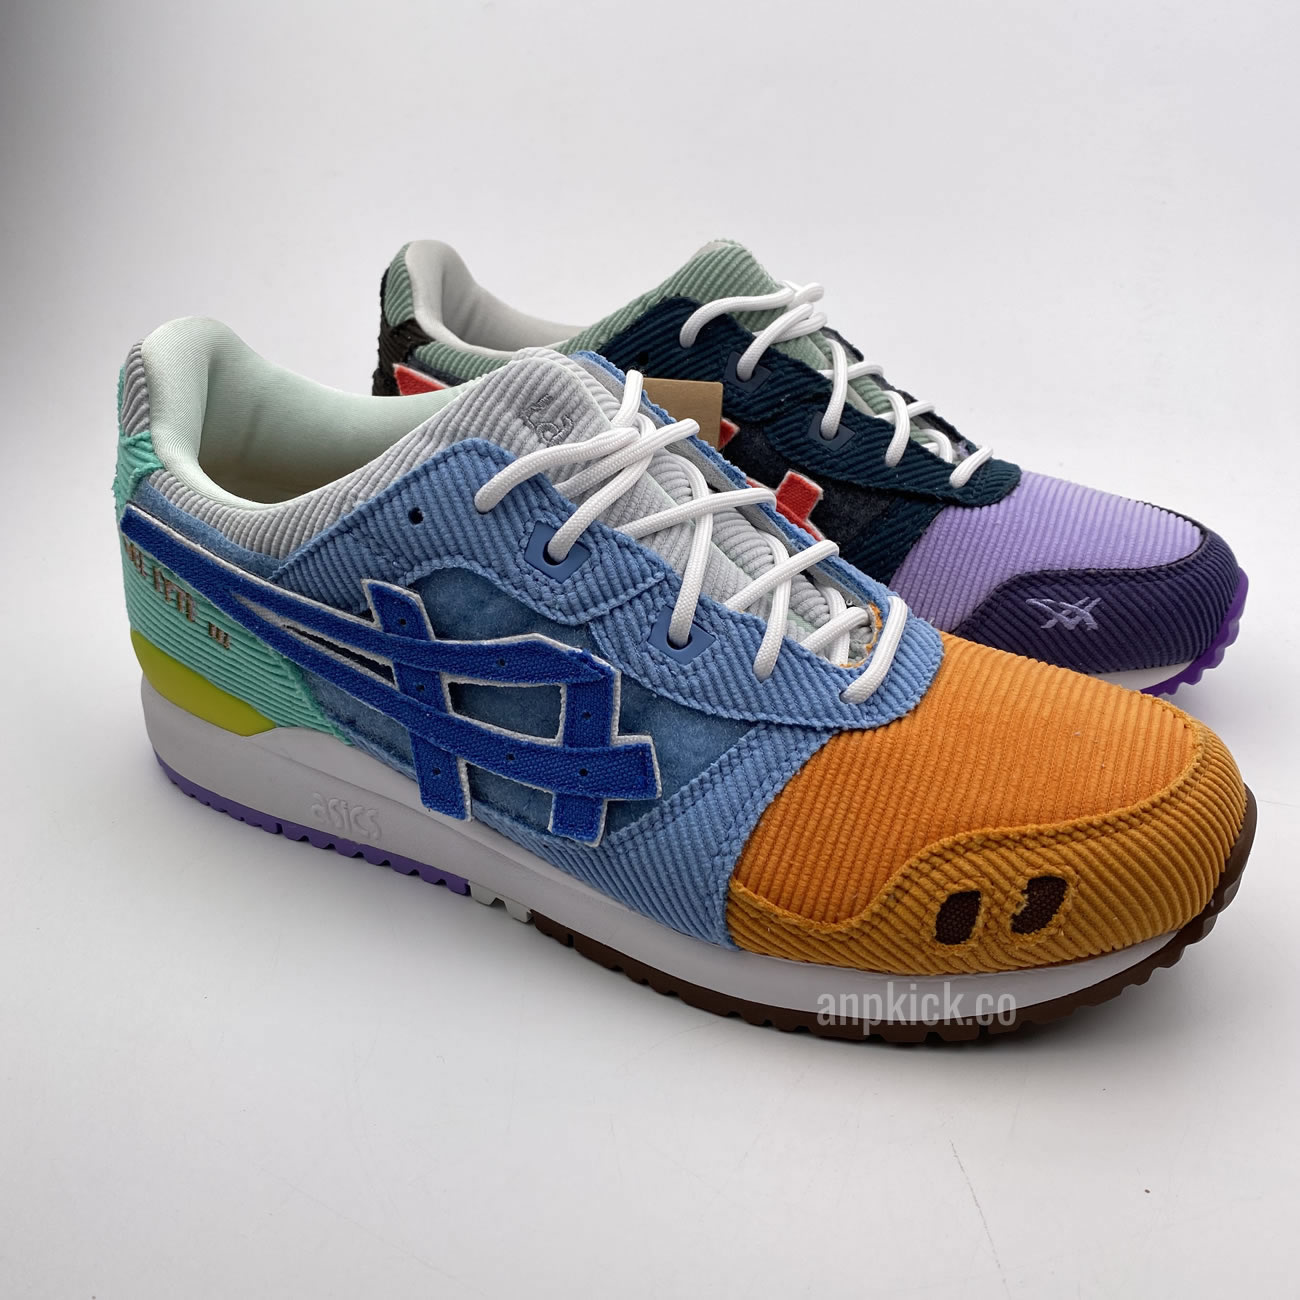 Sean Wotherspoon Atmos Asics Gel Lyte Og Shoes Multi 1203a019 000 (4) - newkick.org